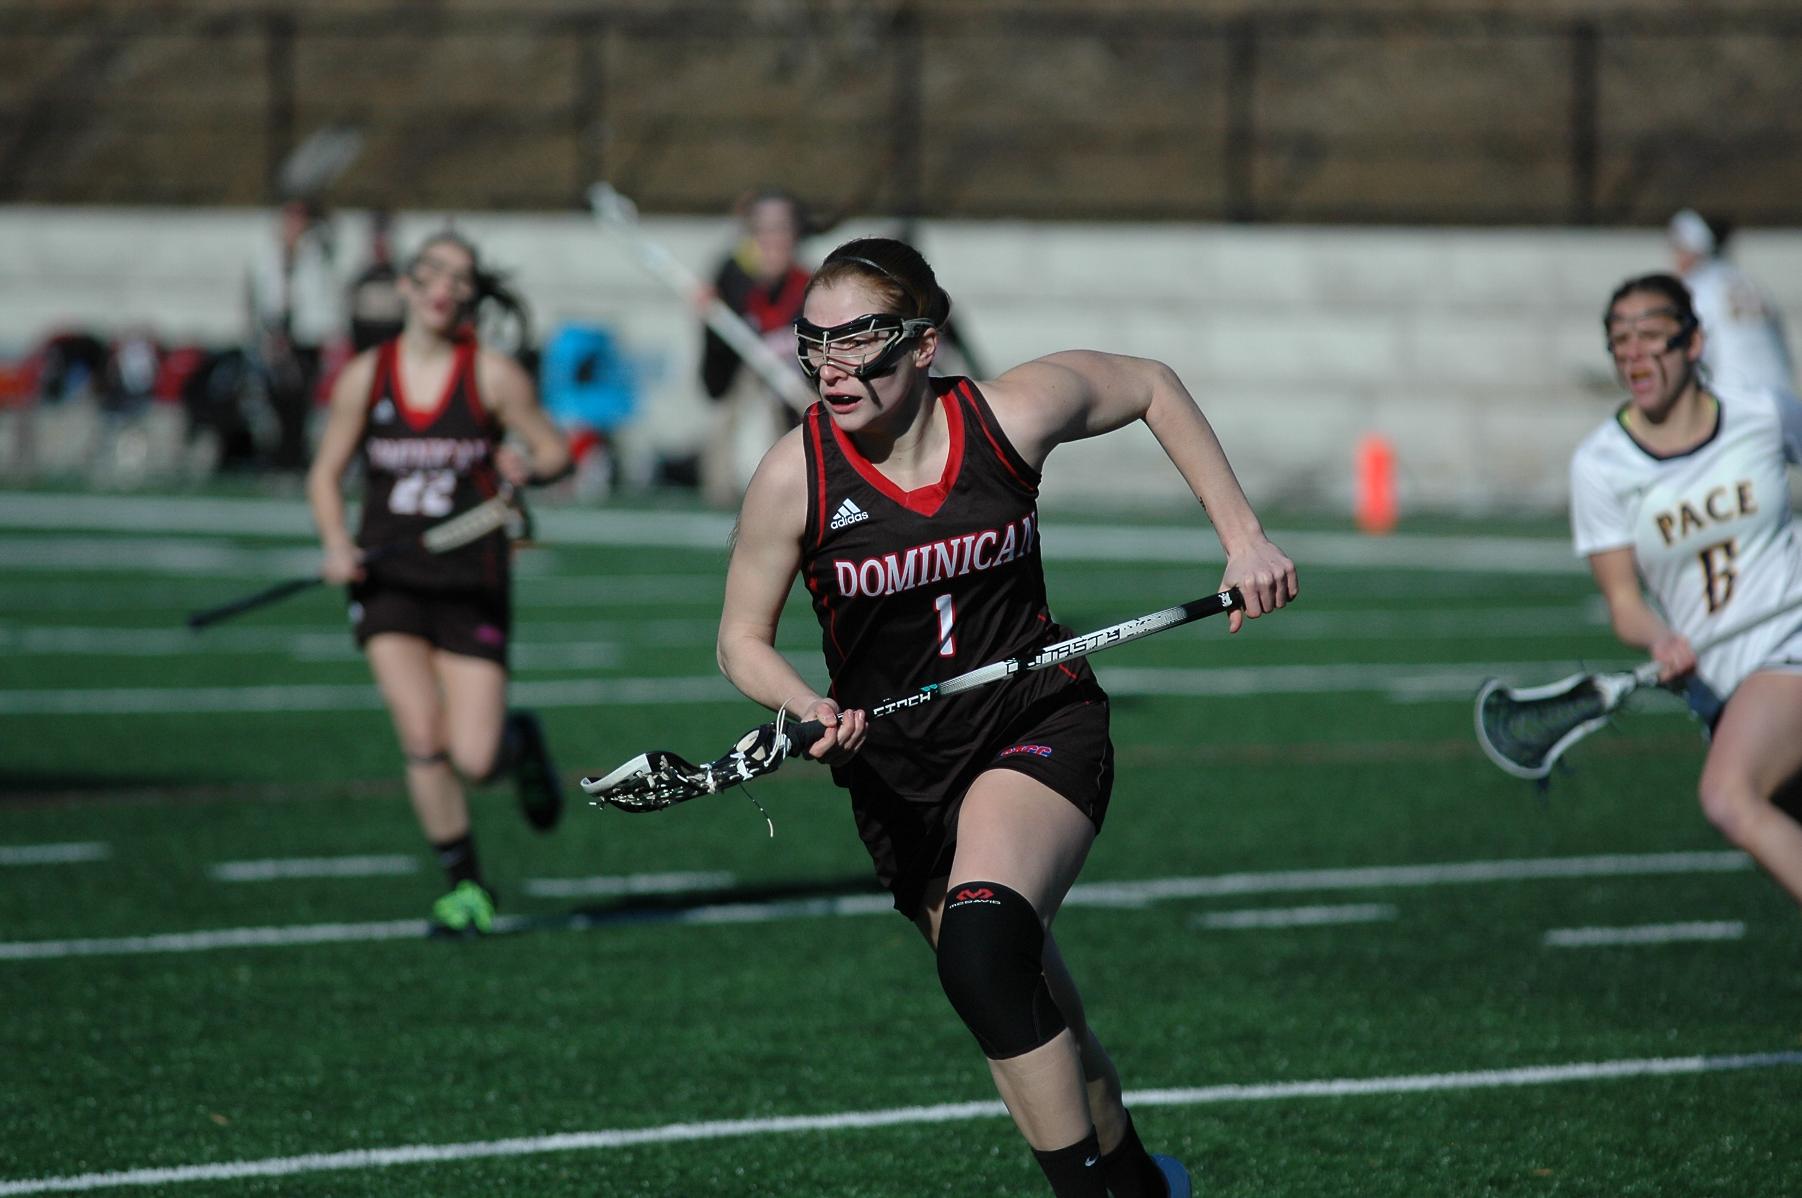 FIRST HALF RUN LEADS SPARTANS OVER WOMEN'S LACROSSE